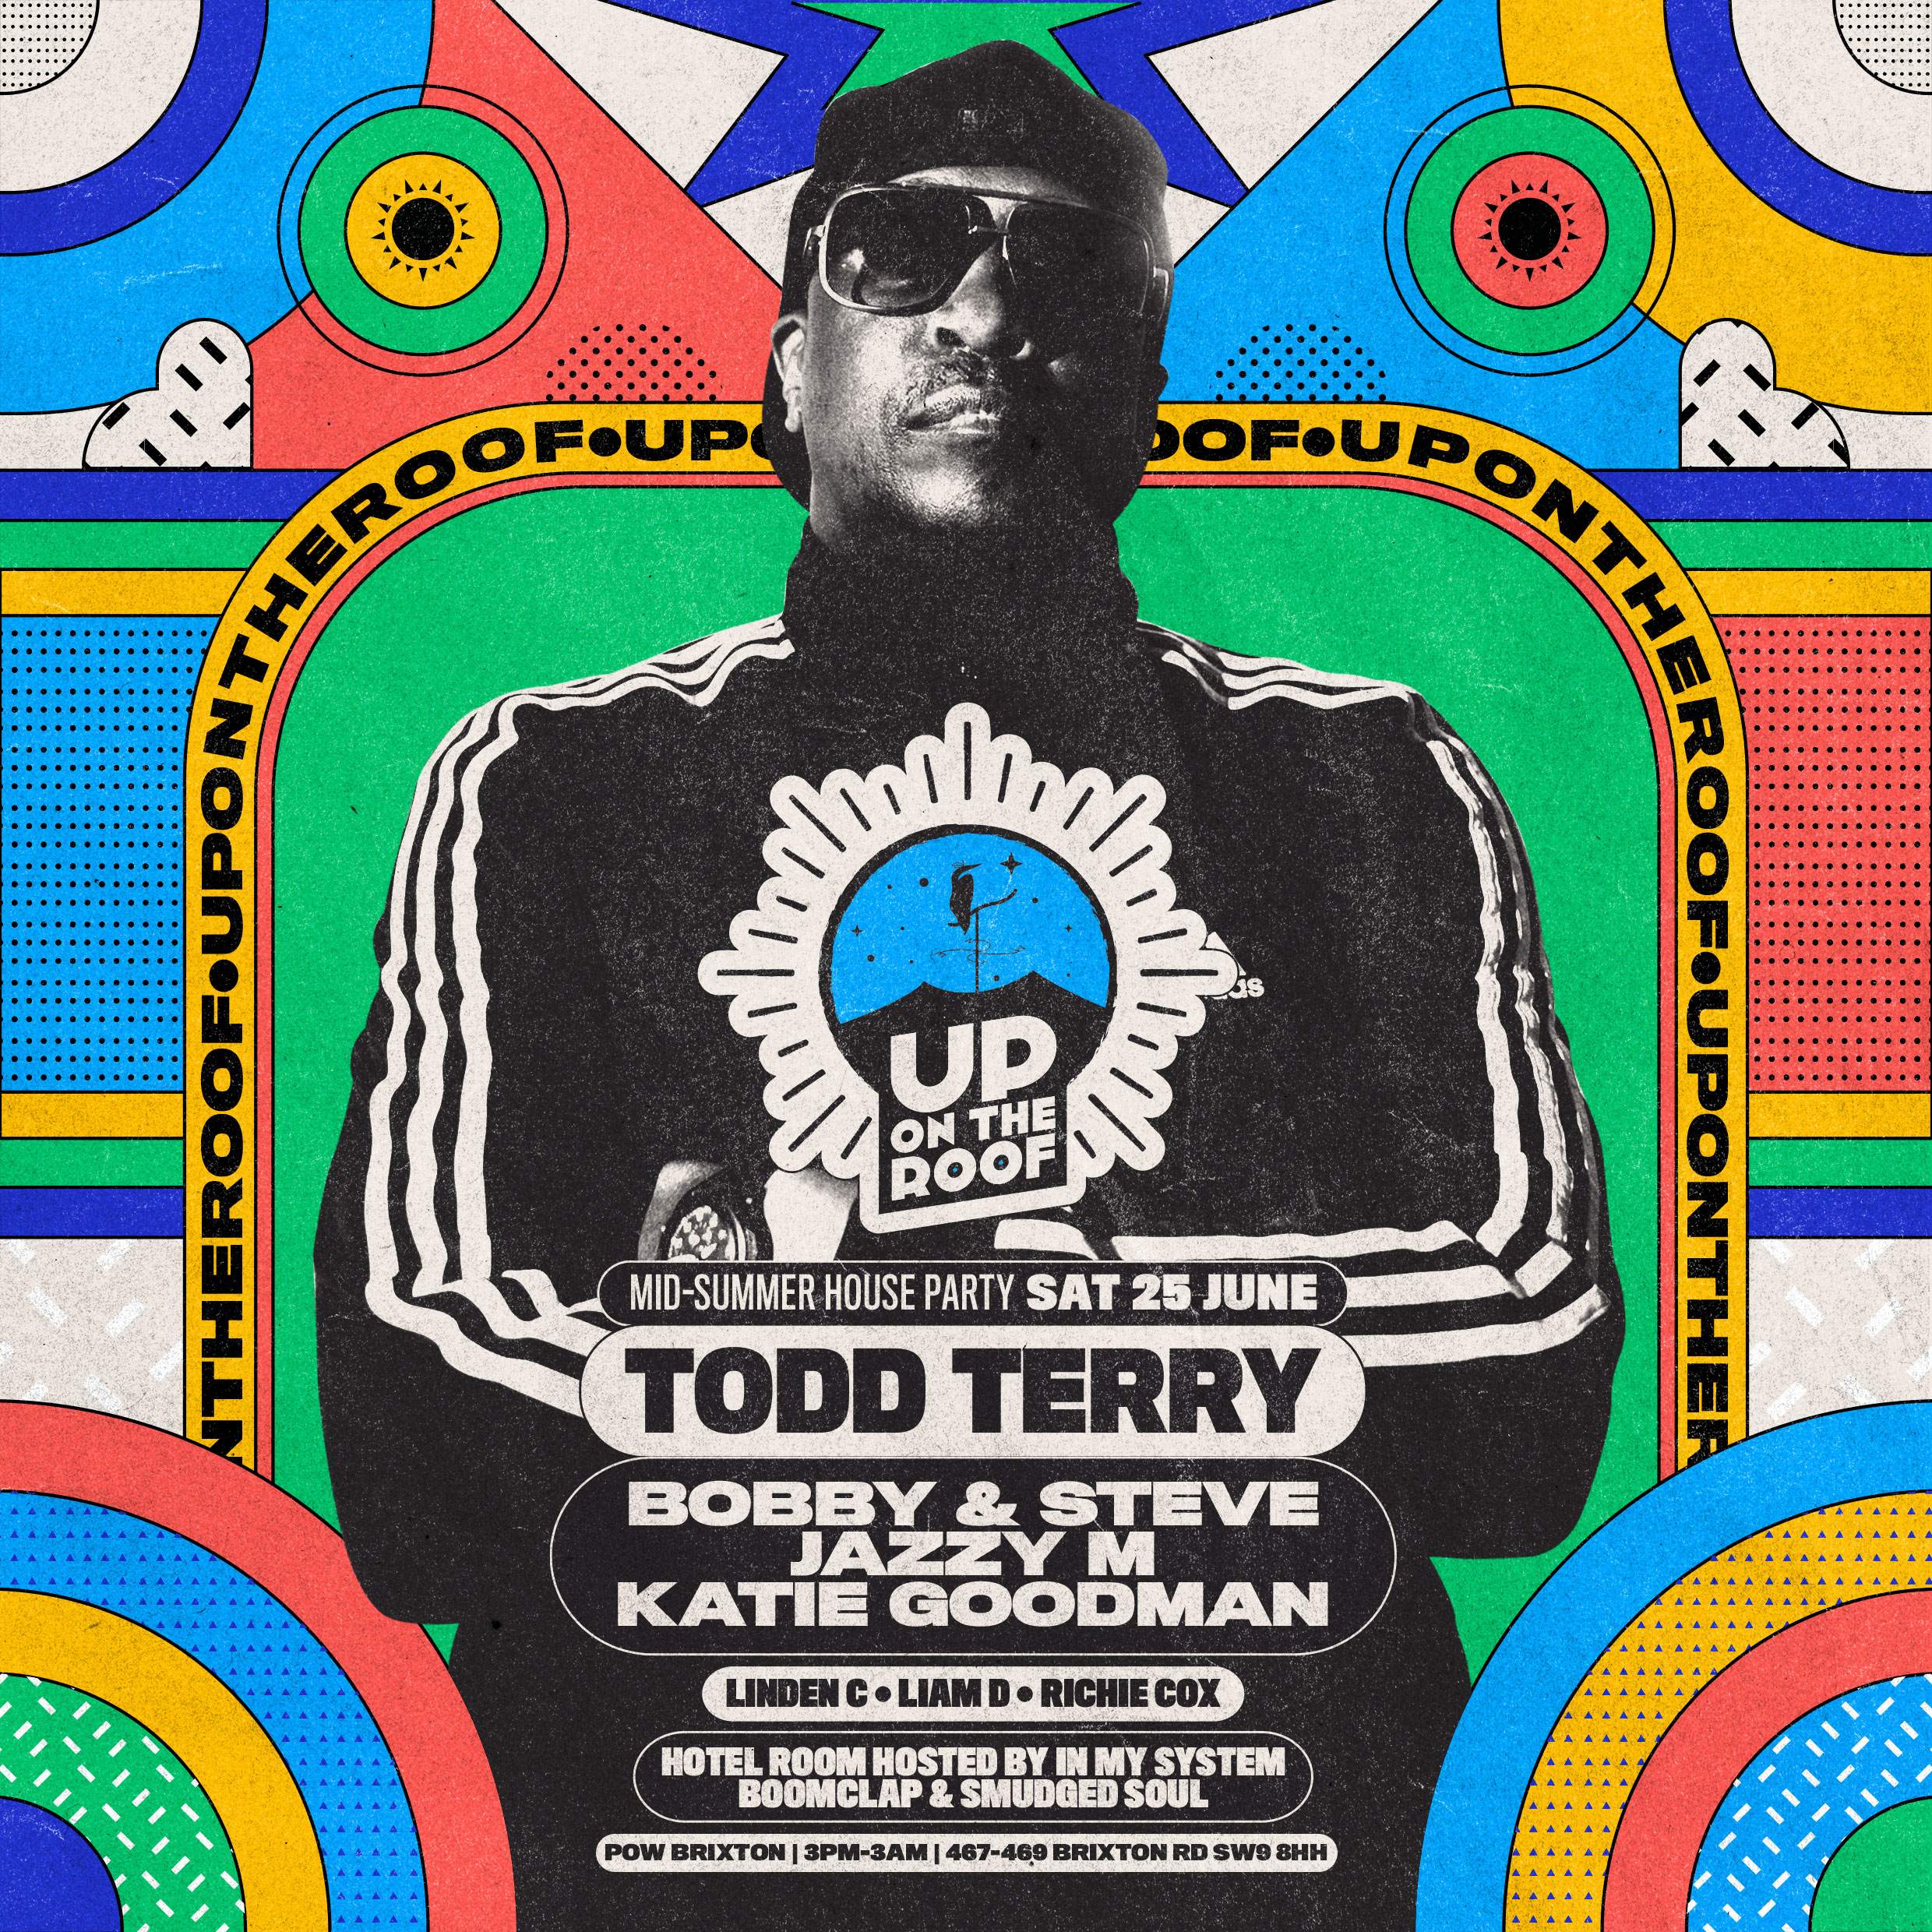 Up On The Roof's Mid-Summer House Party with Todd Terry, Bobby & Steve - フライヤー表